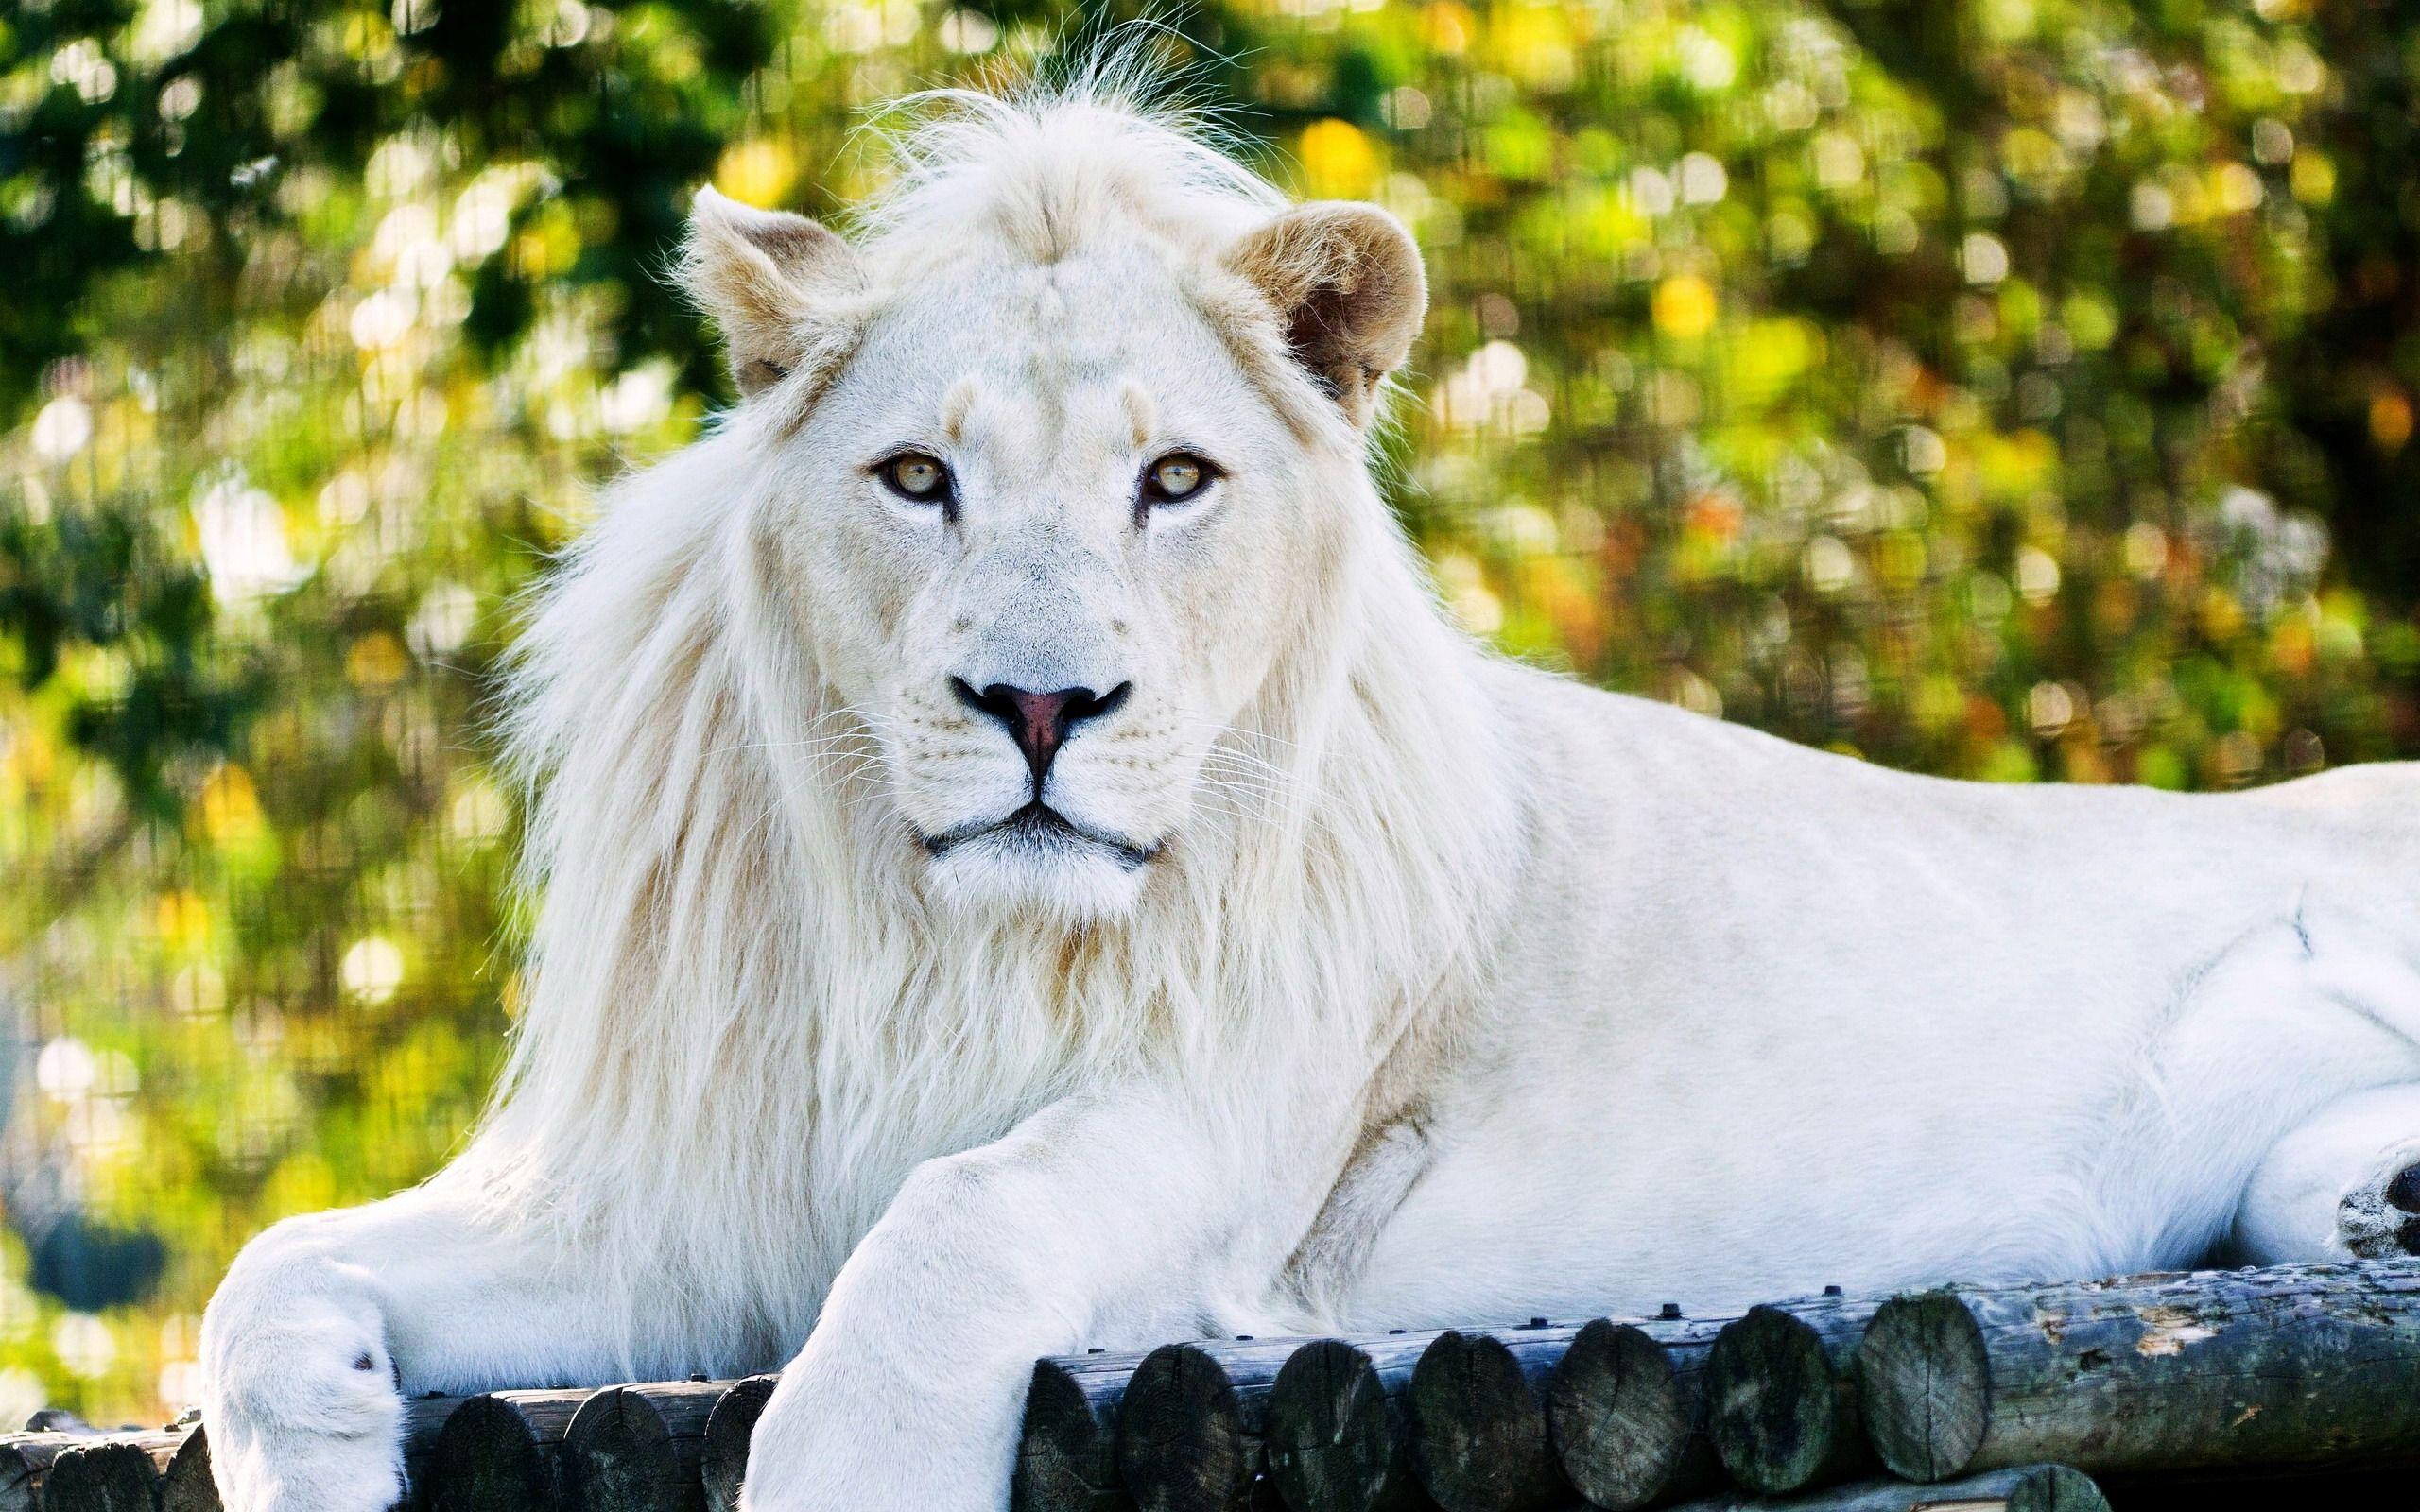 White Lion Cool Wallpapers - Top Free White Lion Cool Backgrounds ...